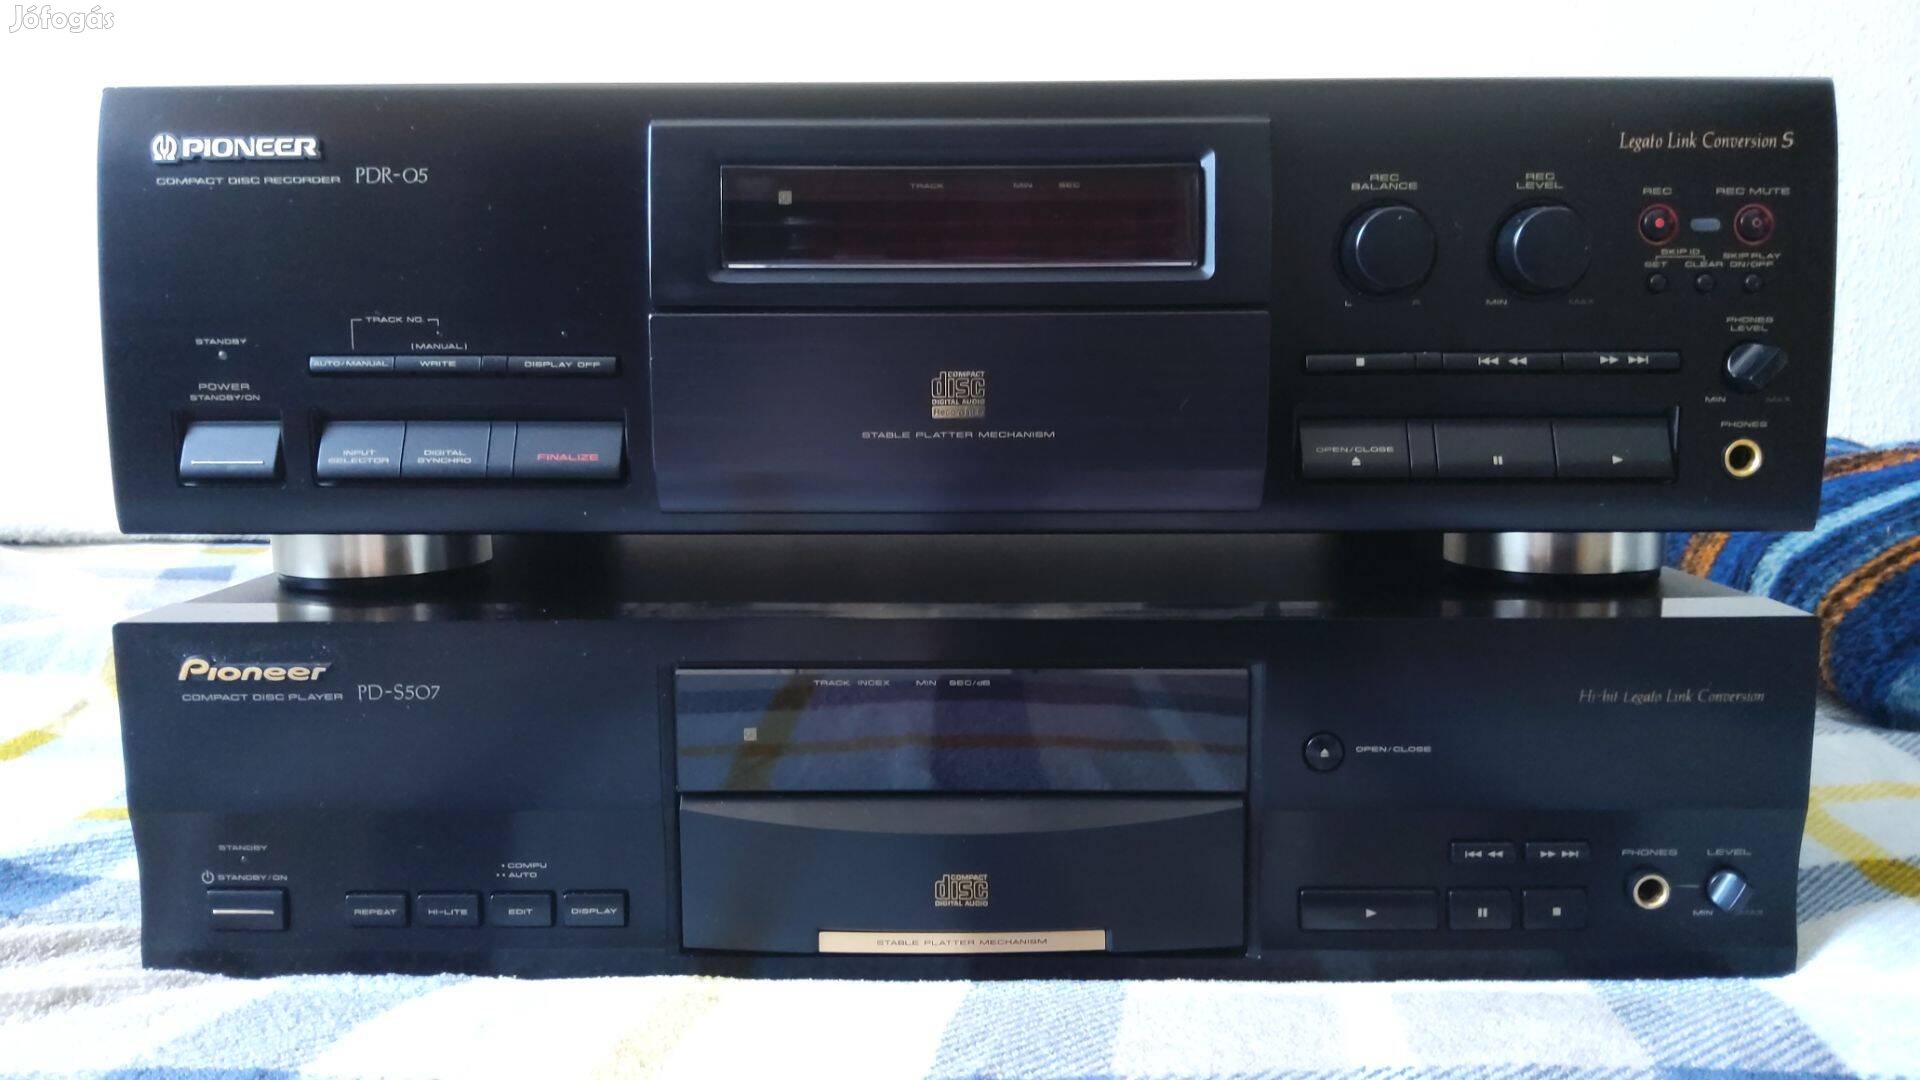 Pioneer PDR-05 PD-S507